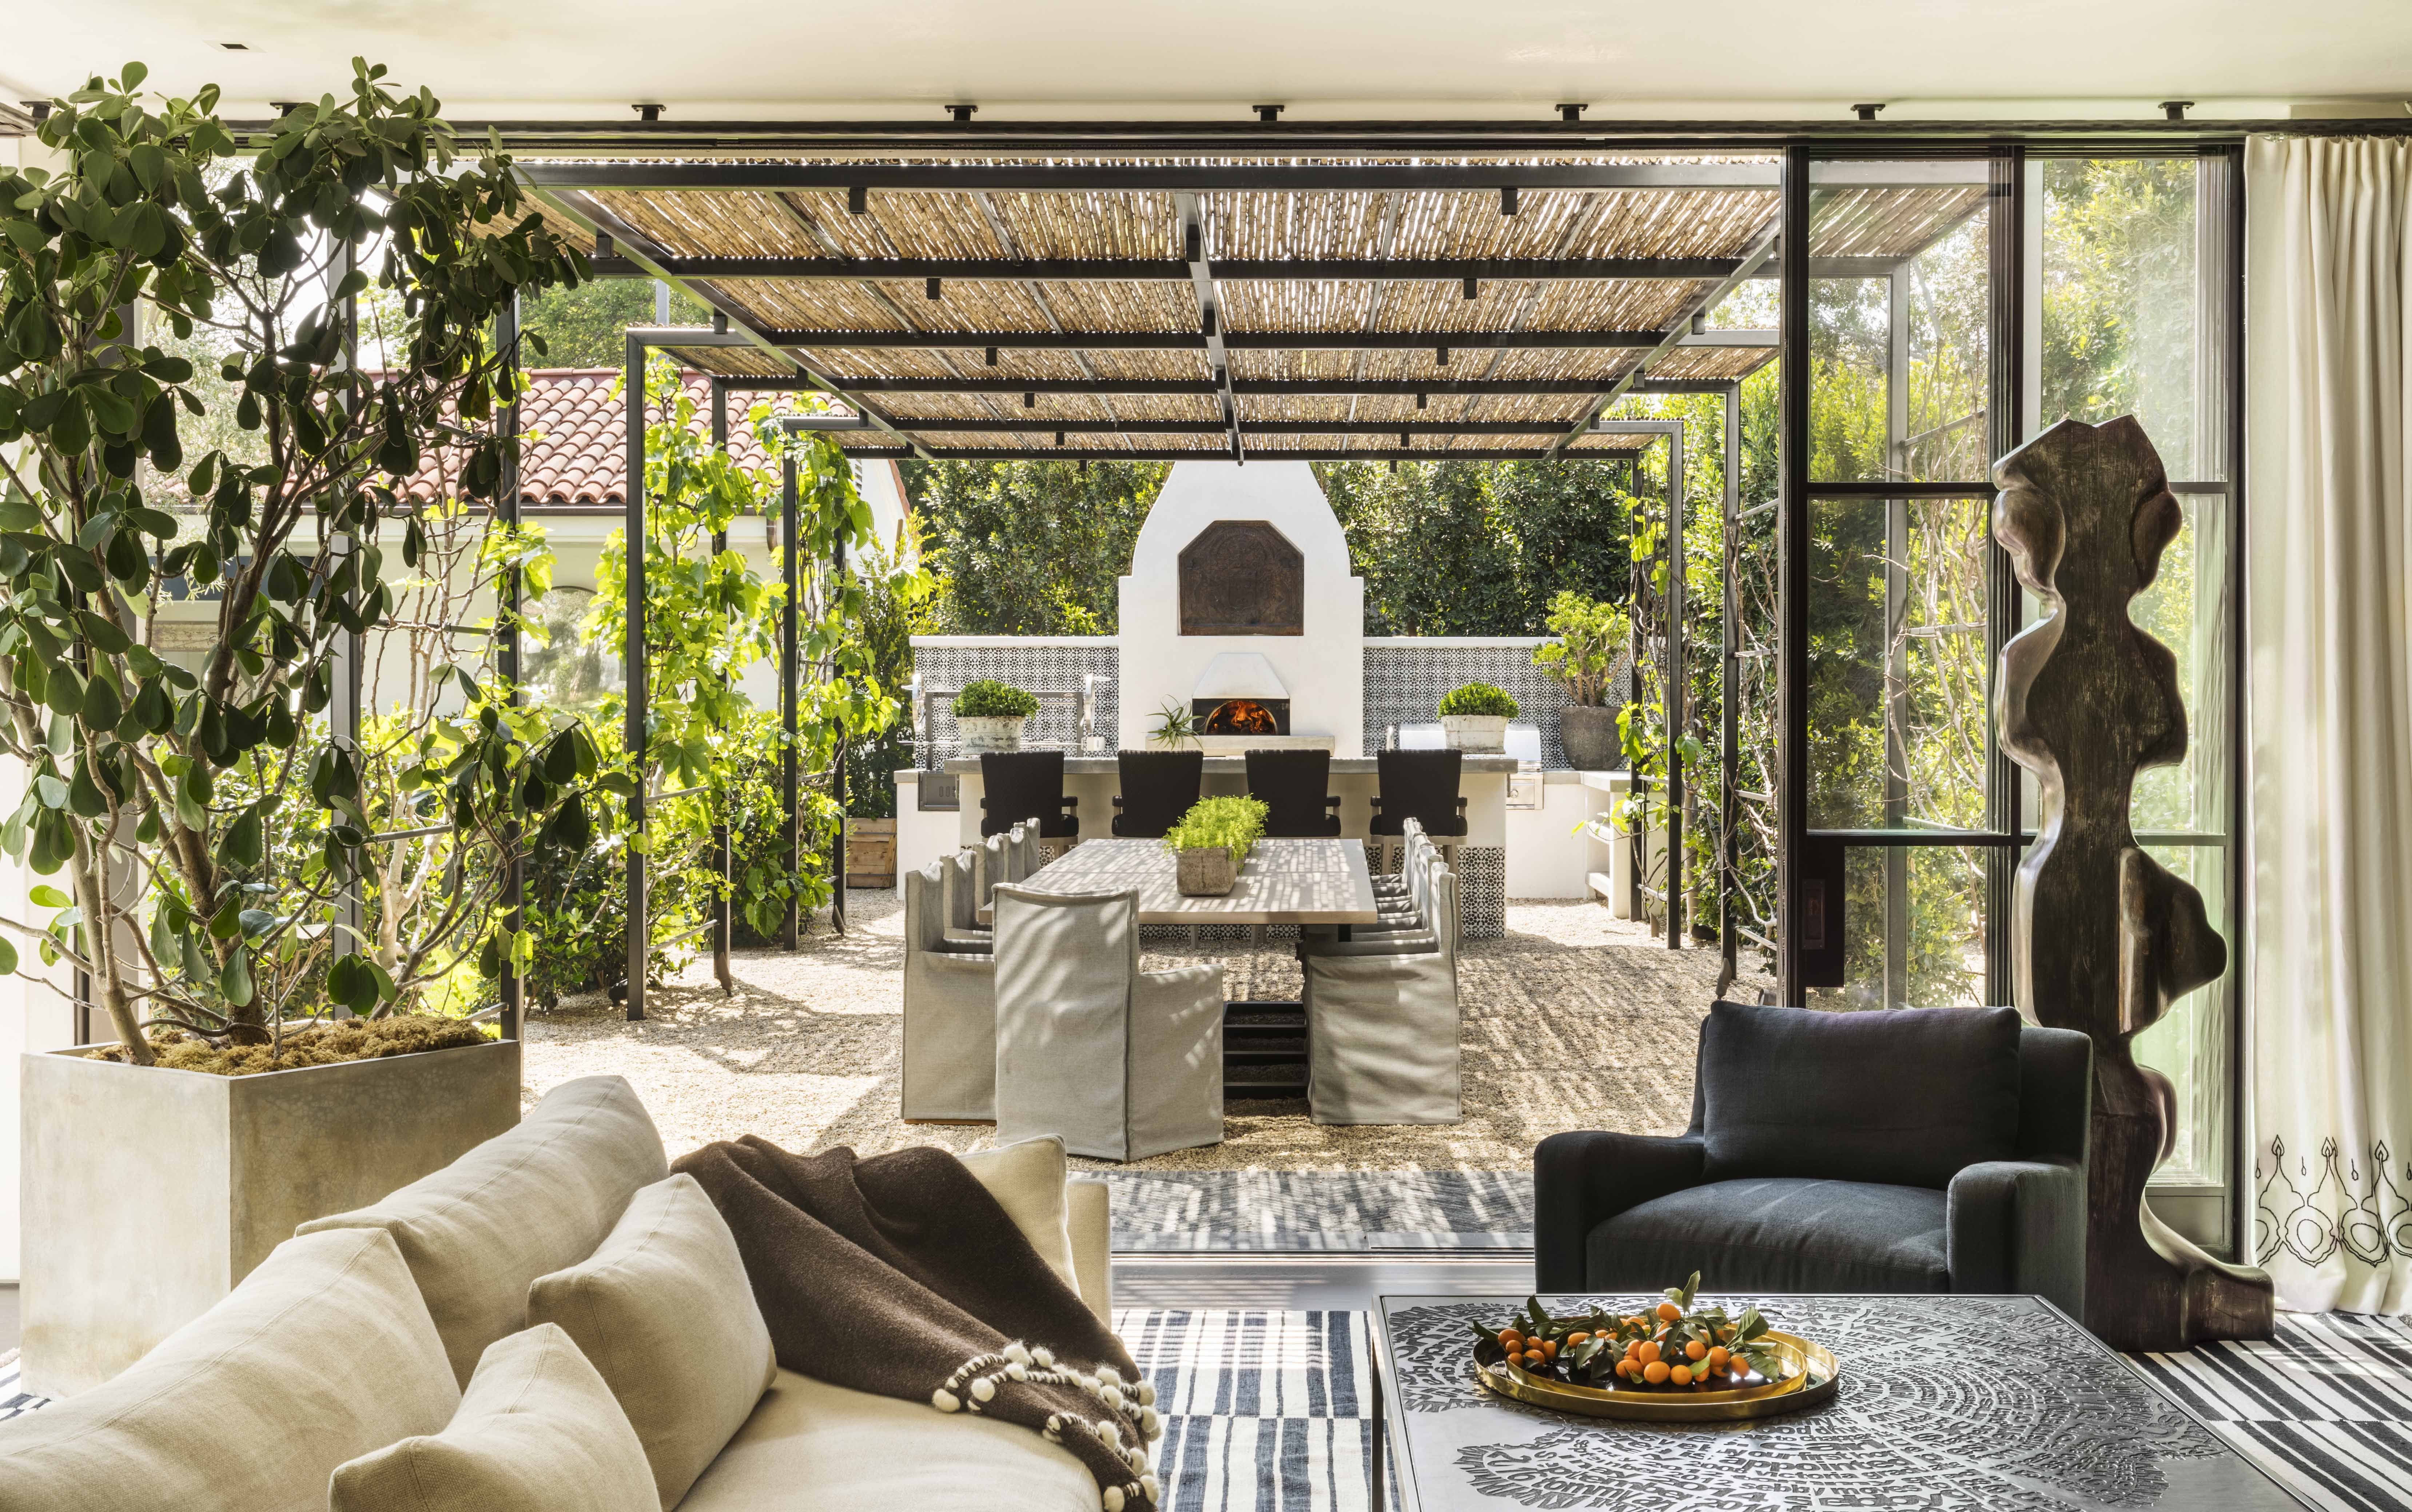 16 Indoor-Outdoor Room Ideas Perfect for Creating a Cohesive Space